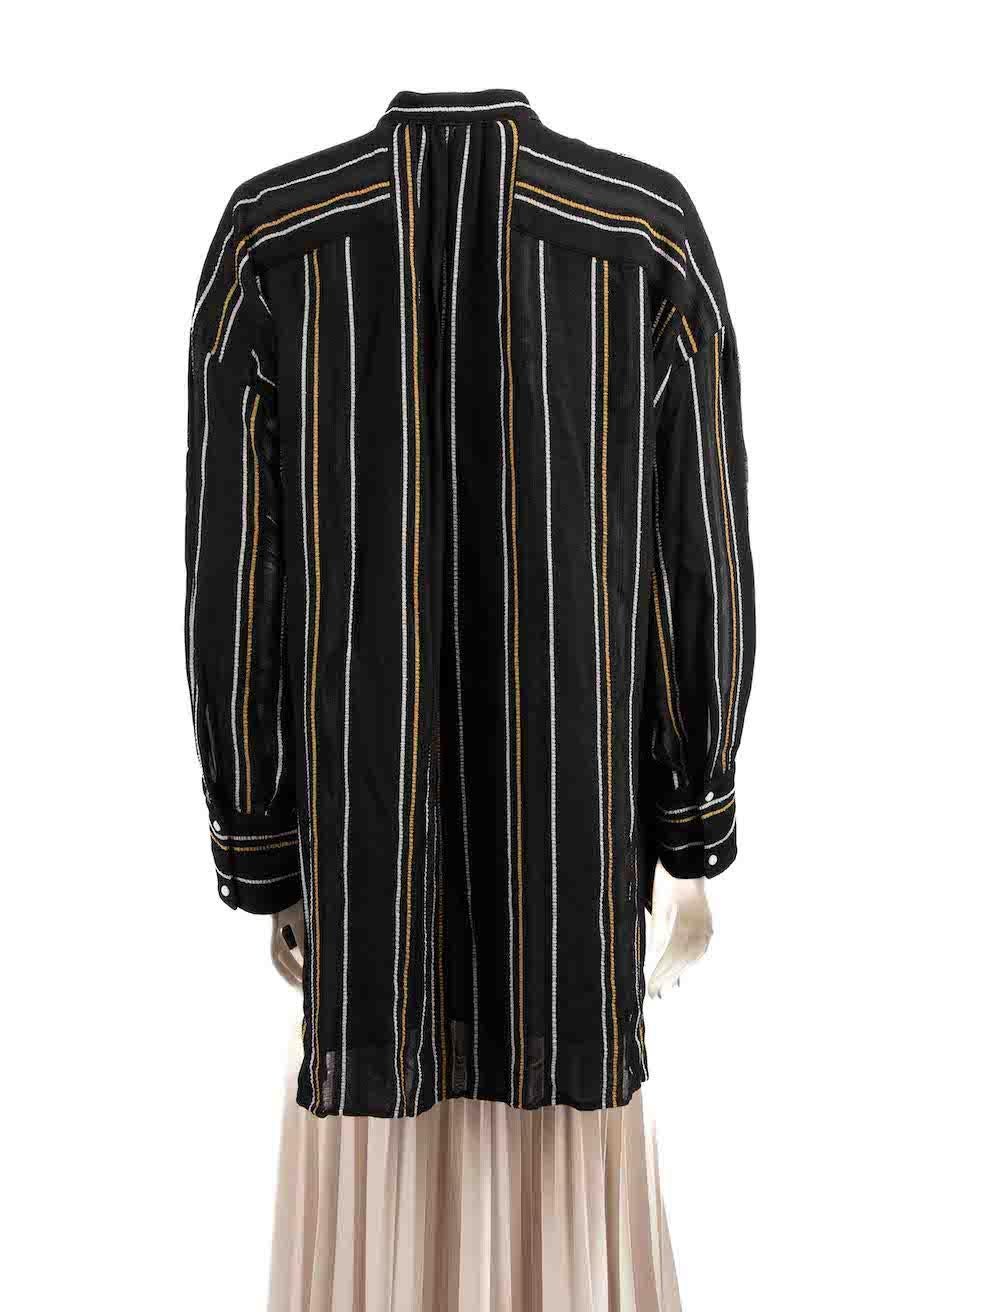 Proenza Schouler Black Striped Tunic Blouse Size XS In New Condition For Sale In London, GB